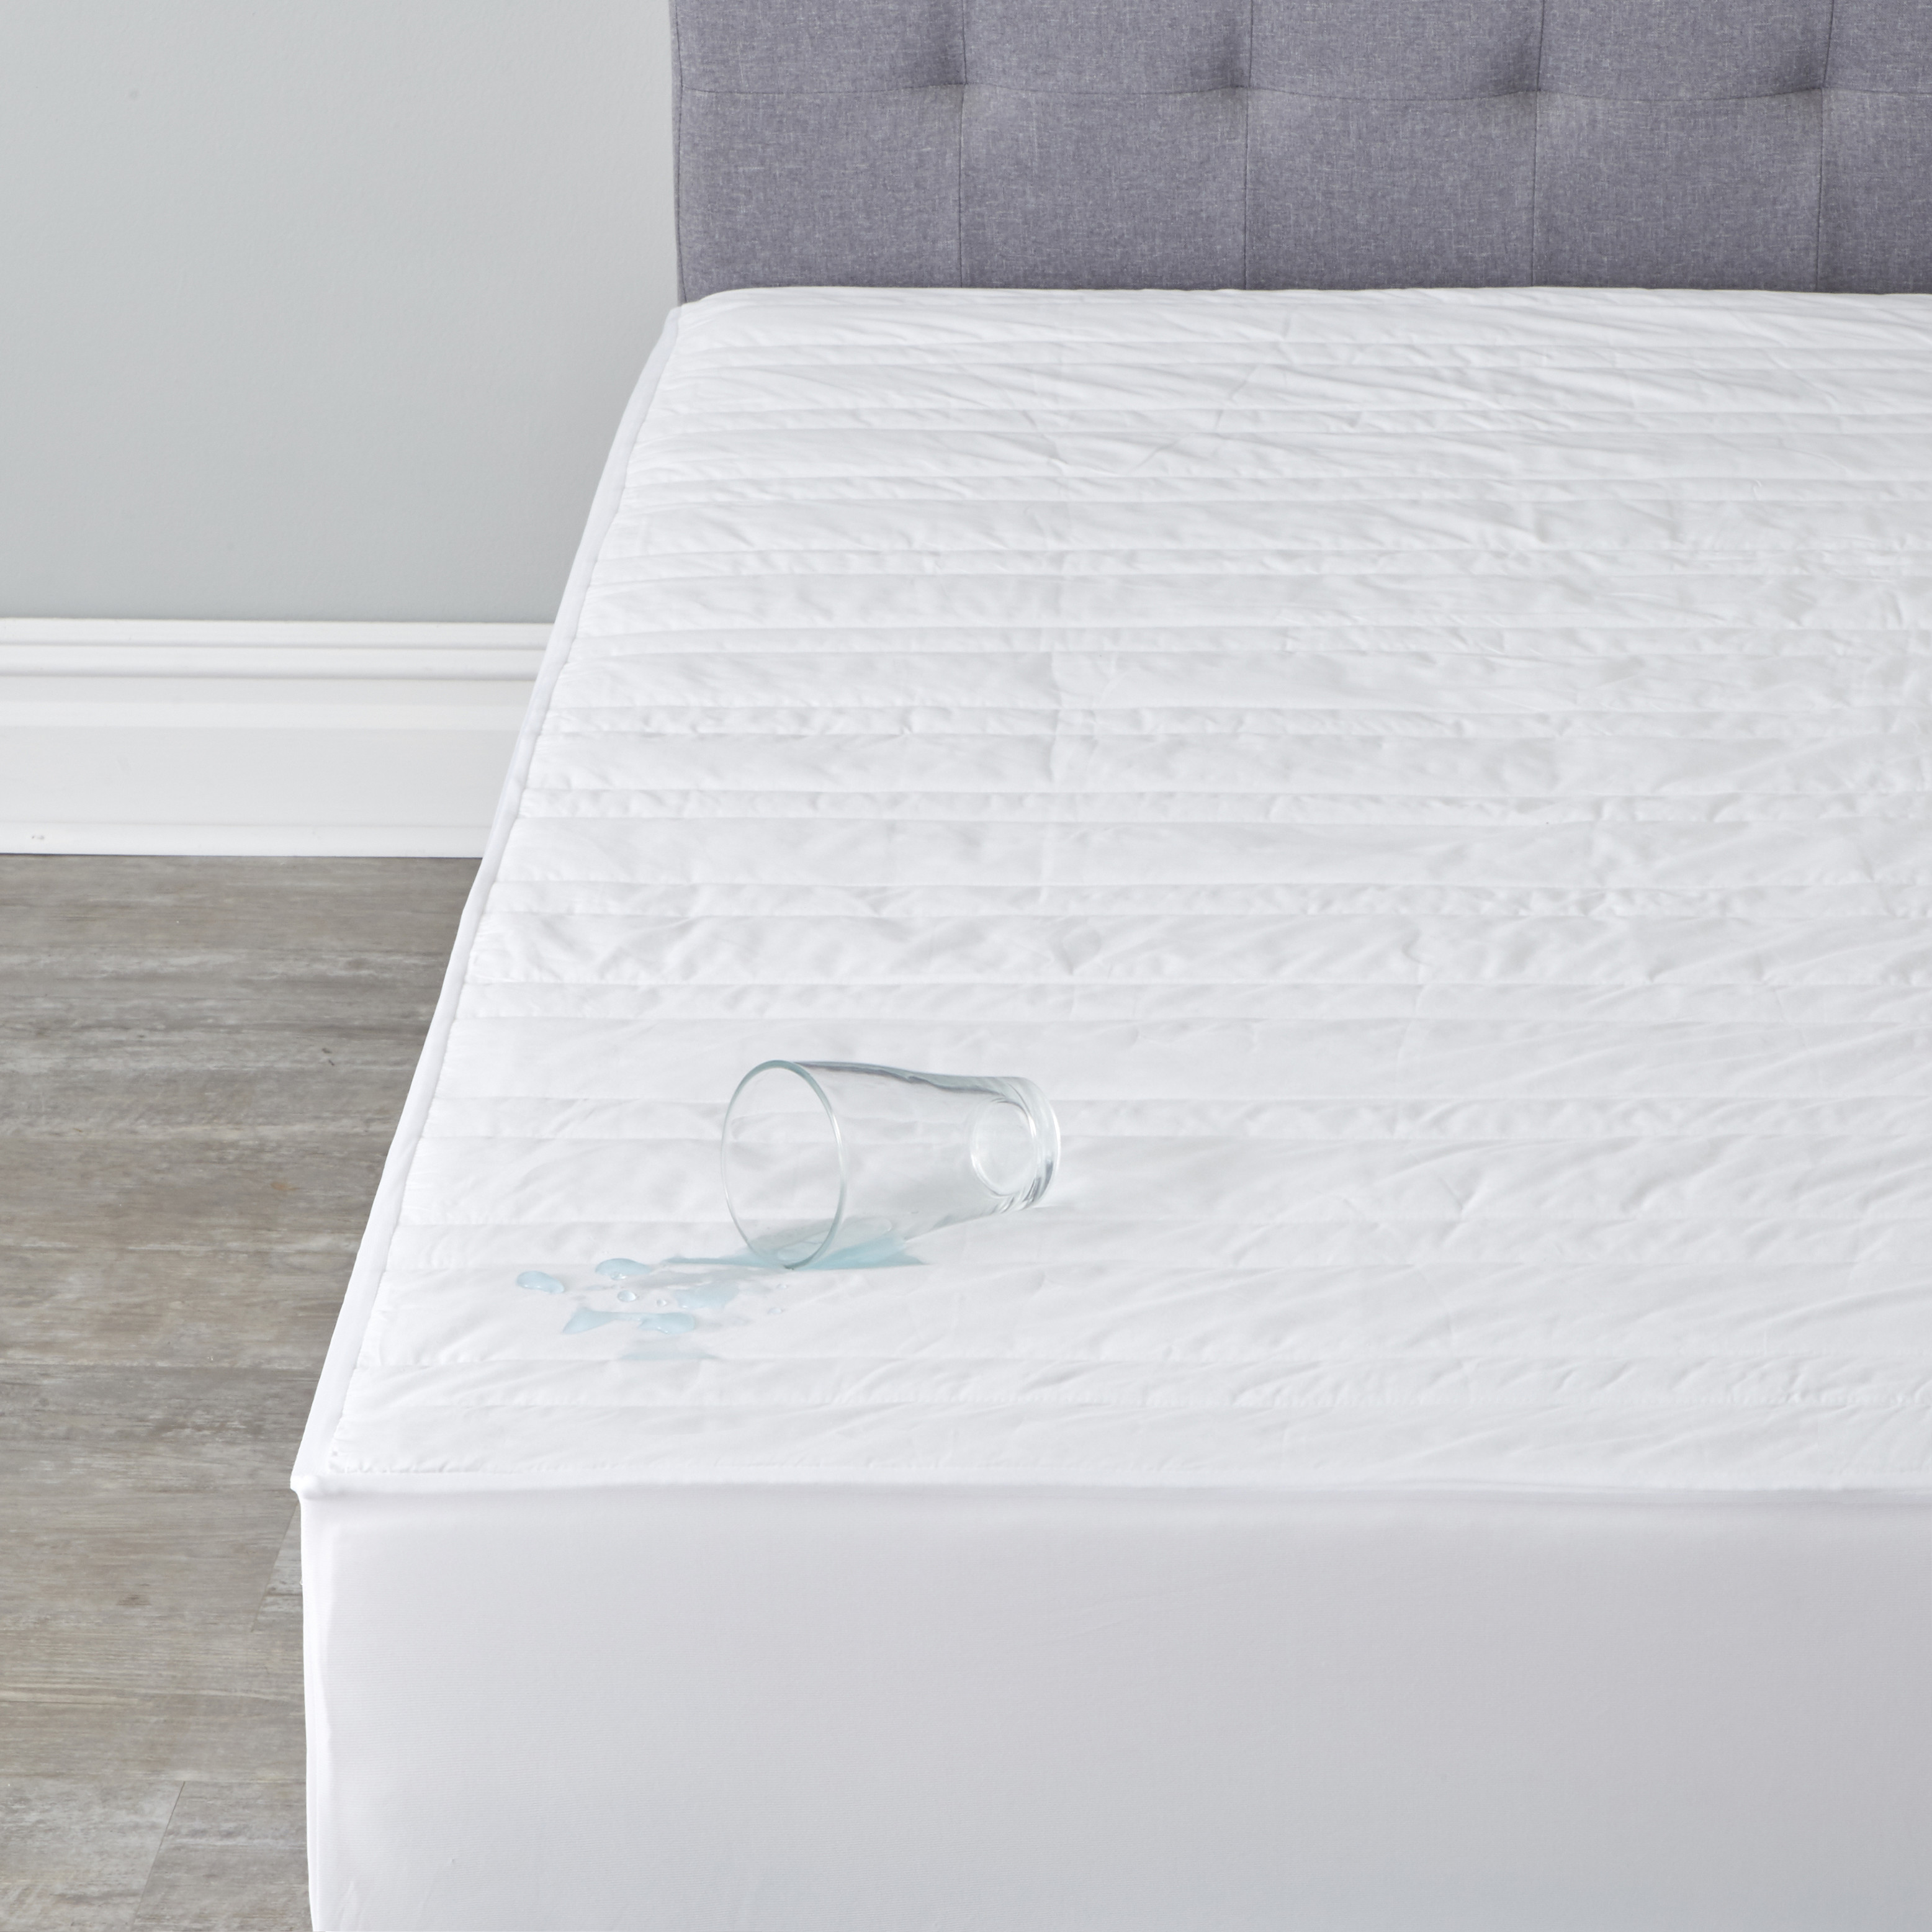 Soft & Dry Waterproof Pad| Mattress Pads & Toppers | Brylane Home